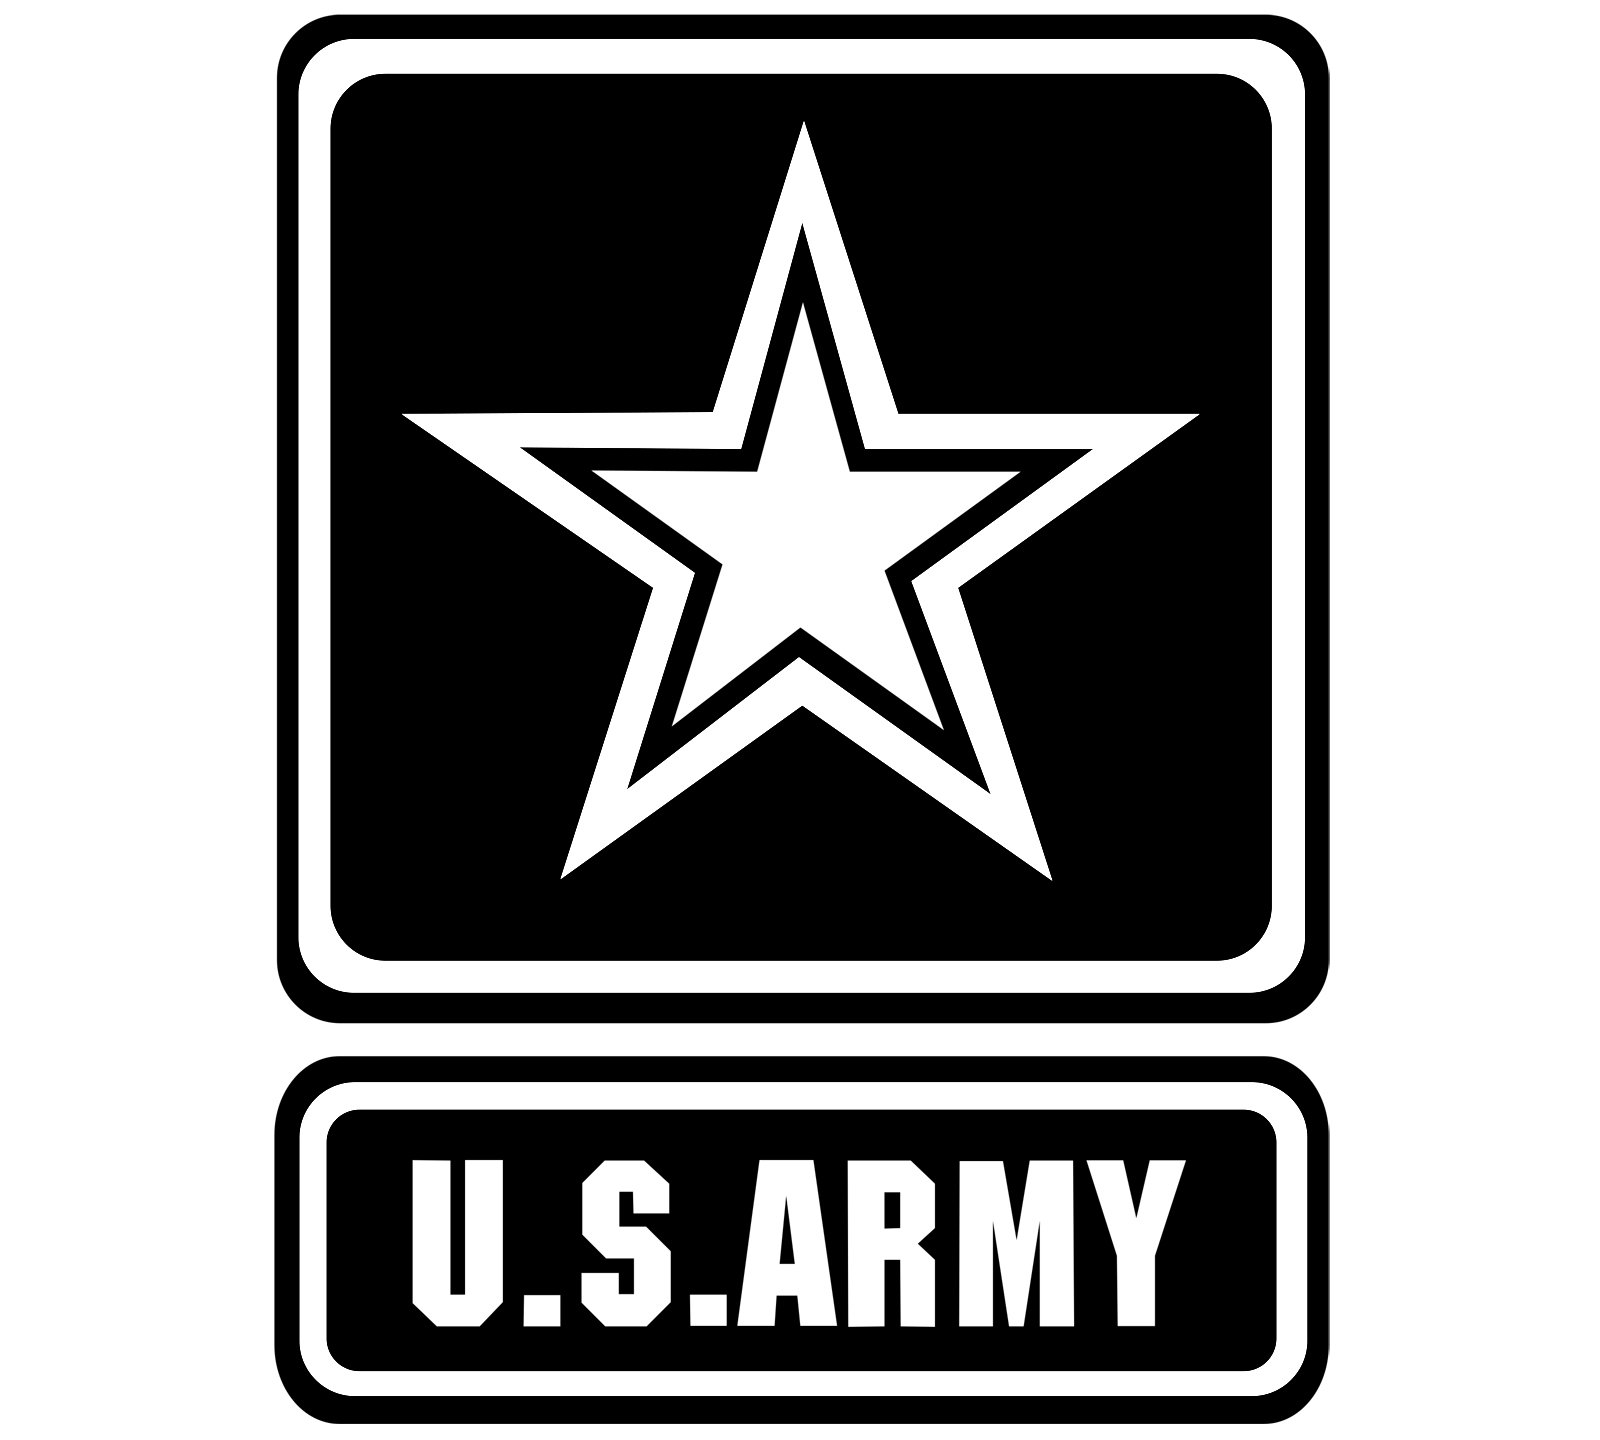 U.S. Army logo and symbol, meaning, history, PNG